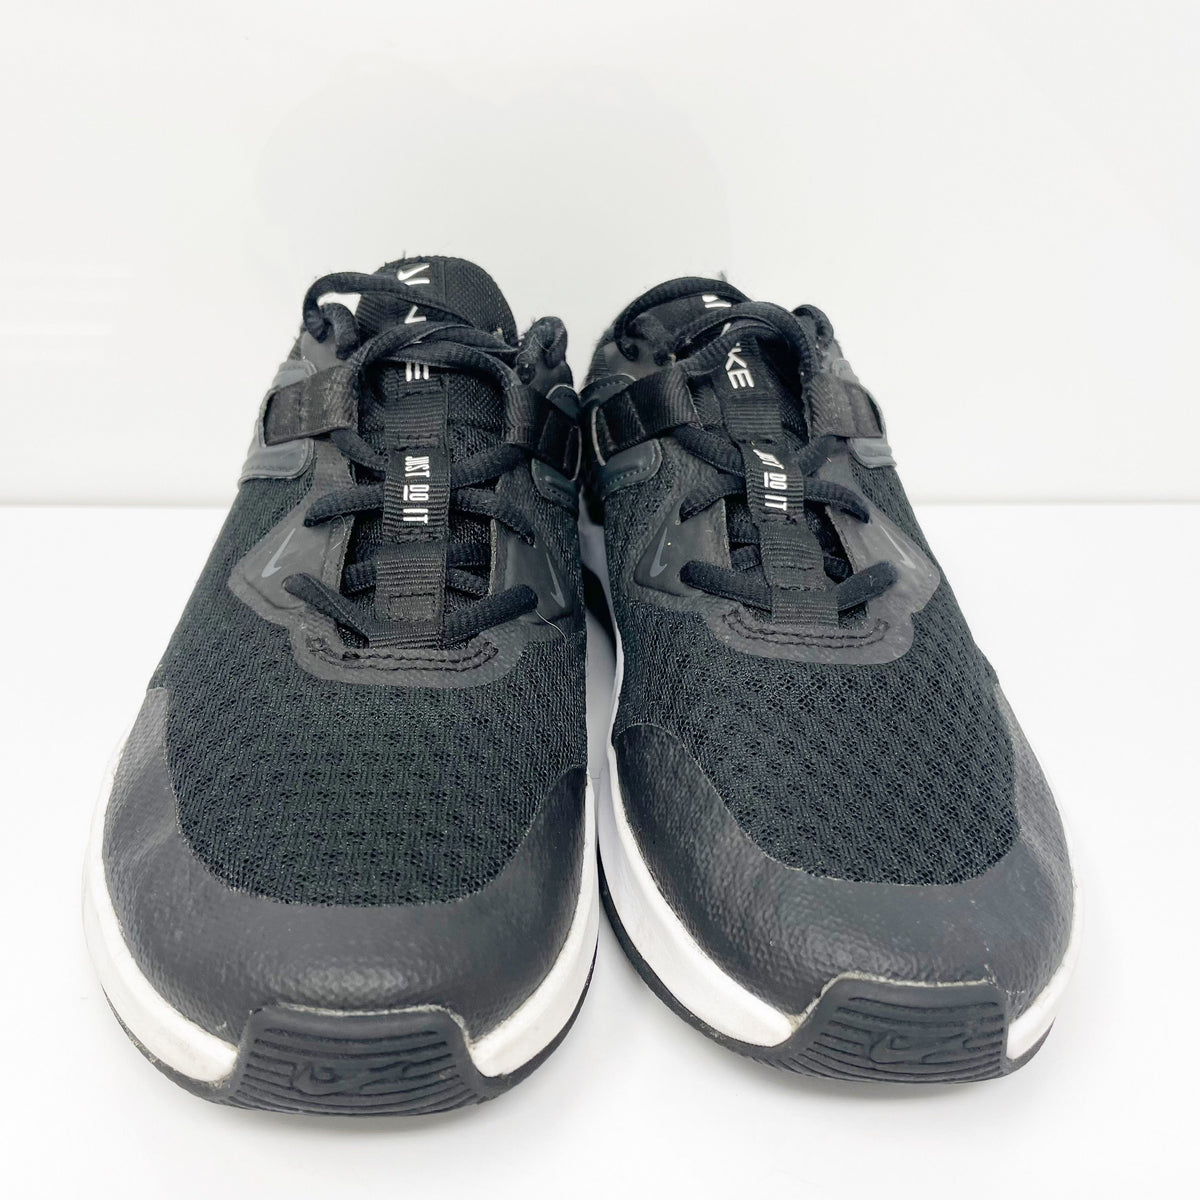 Nike Womens MC Trainer CU3584-004 Black Running Shoes Sneakers Size 6 ...